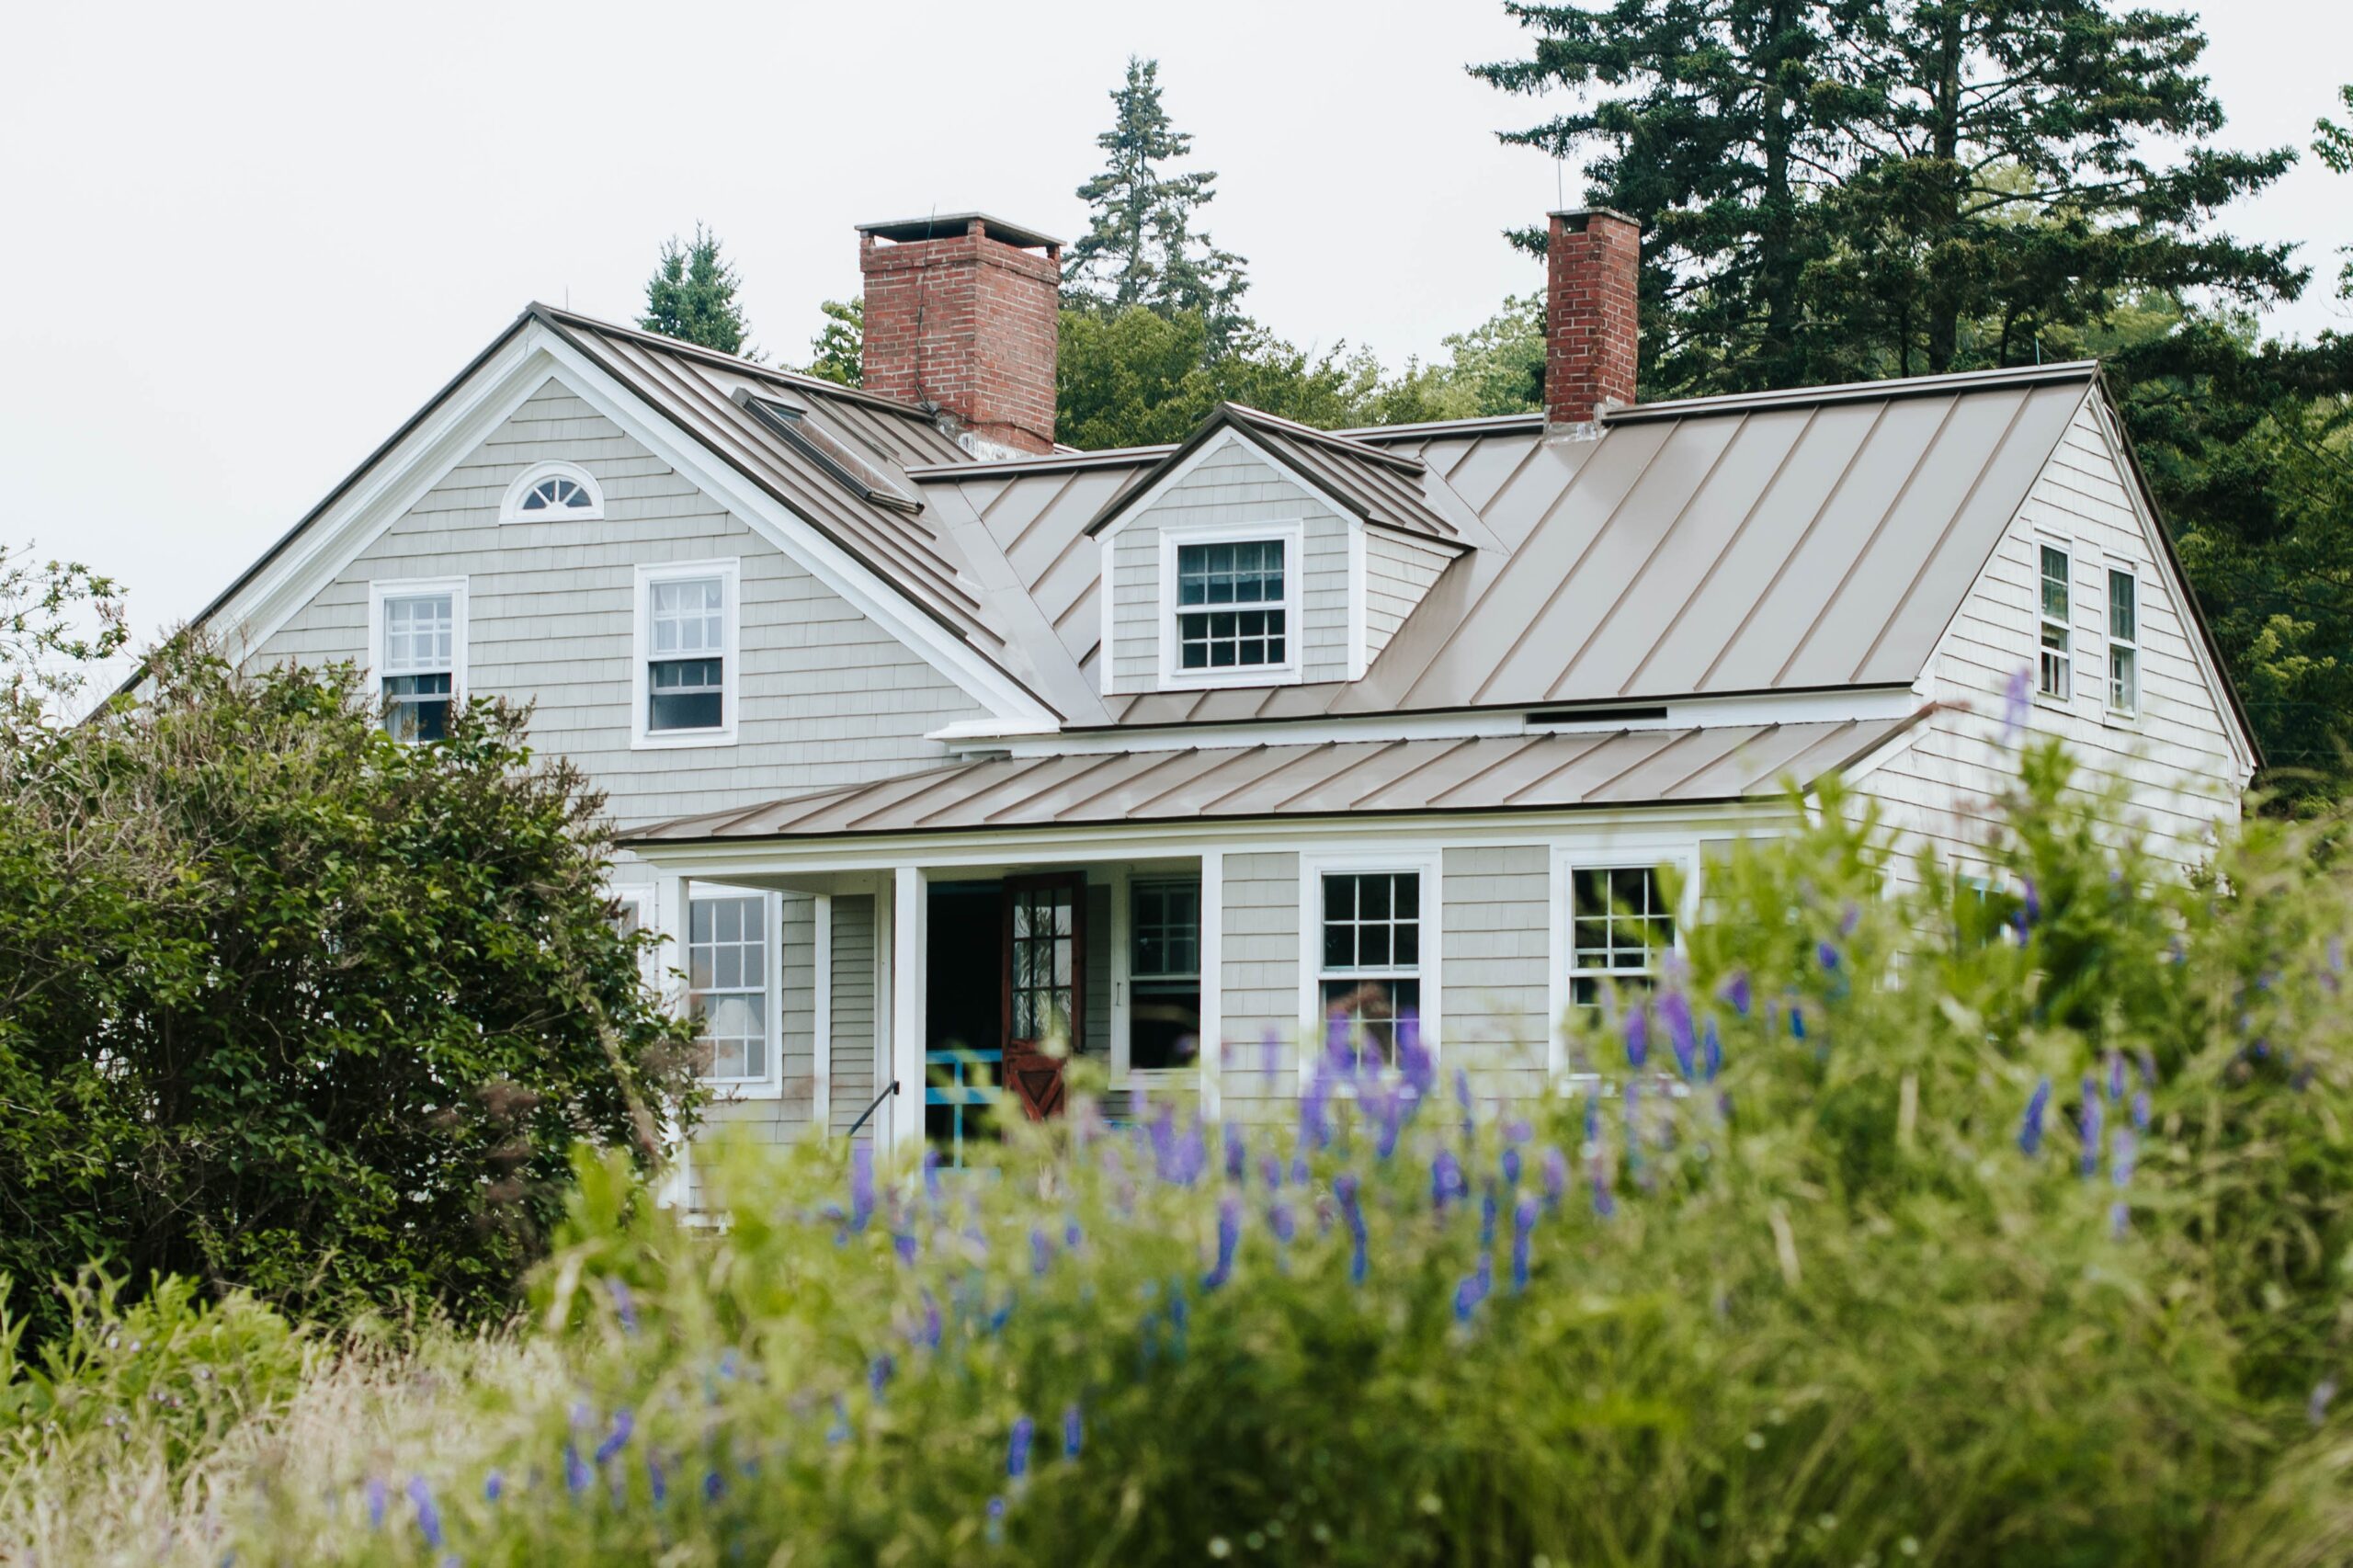 aubrey odom mrSuM73pmsw unsplash scaled How a New Roof Can Dramatically Enhance Your Home’s Curb Appeal